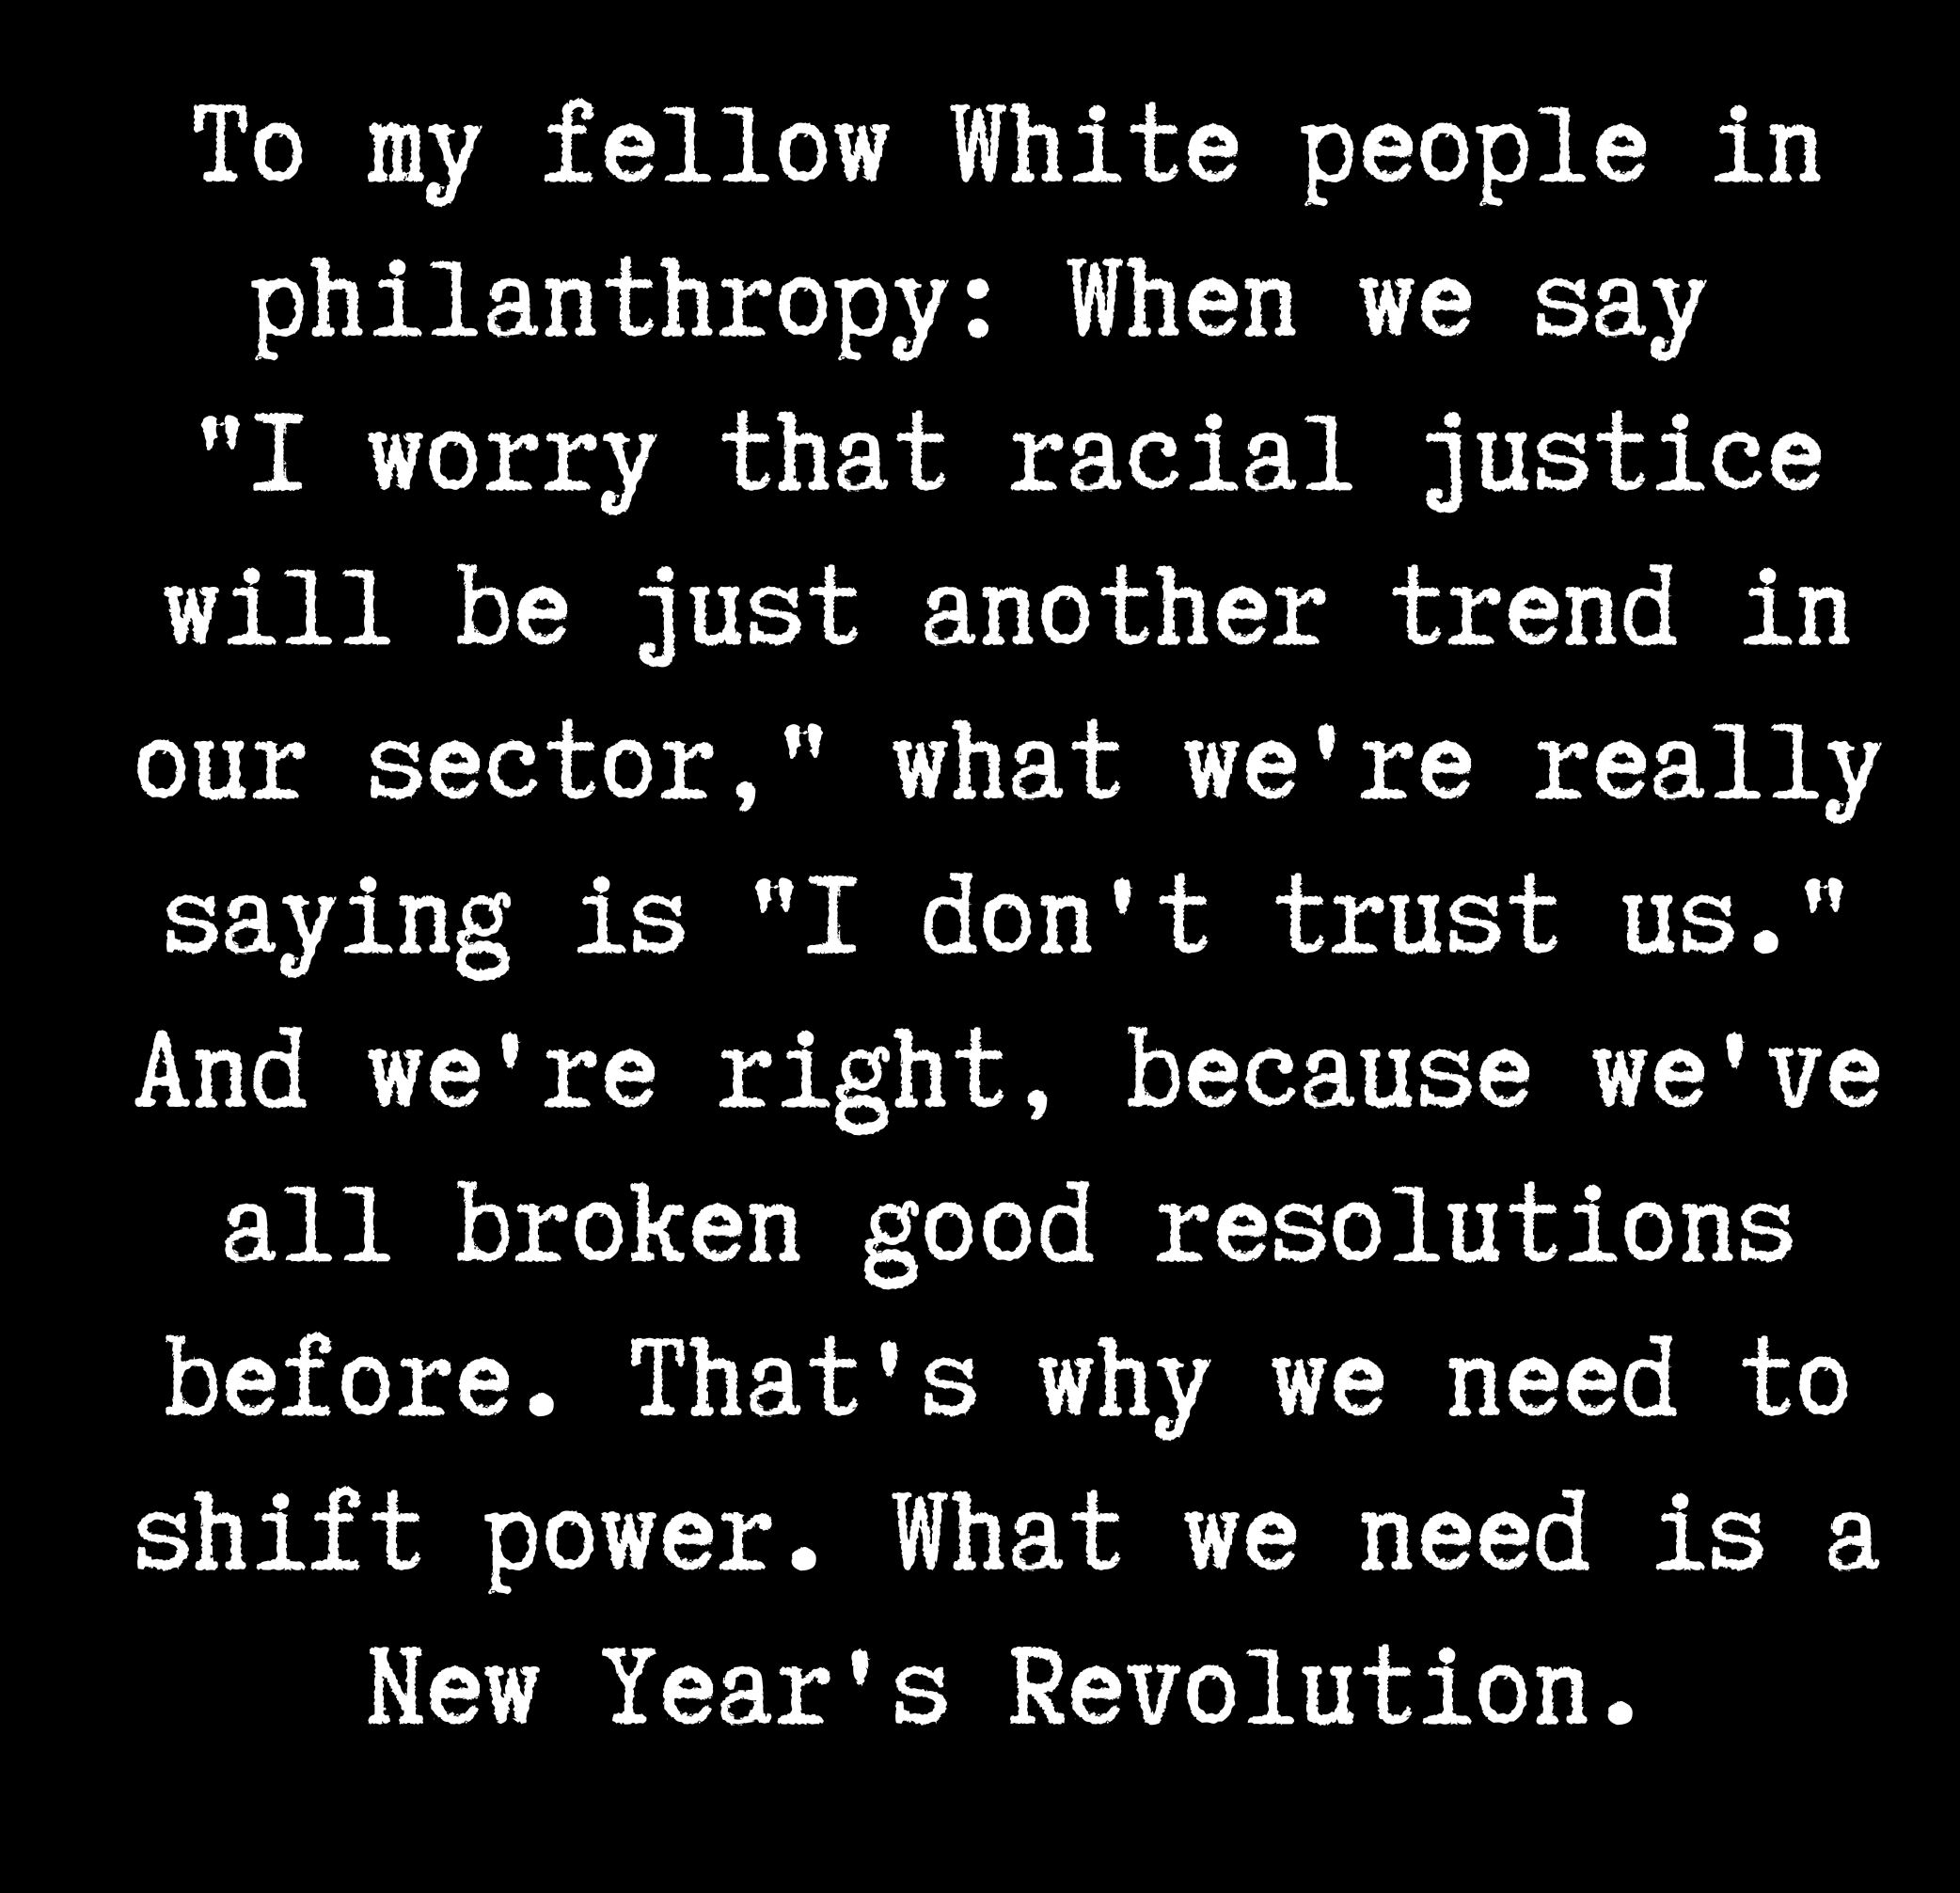 Text box with white type on black background. The text says, To my fellow White people in philanthropy: When we say "I worry that racial justice will be just another trend in our sector," what we're really saying is "I don't trust us." And we're right, because we've all broken good resolutions before. That's why we need to shift power. What we need is a New Year's Revolution."